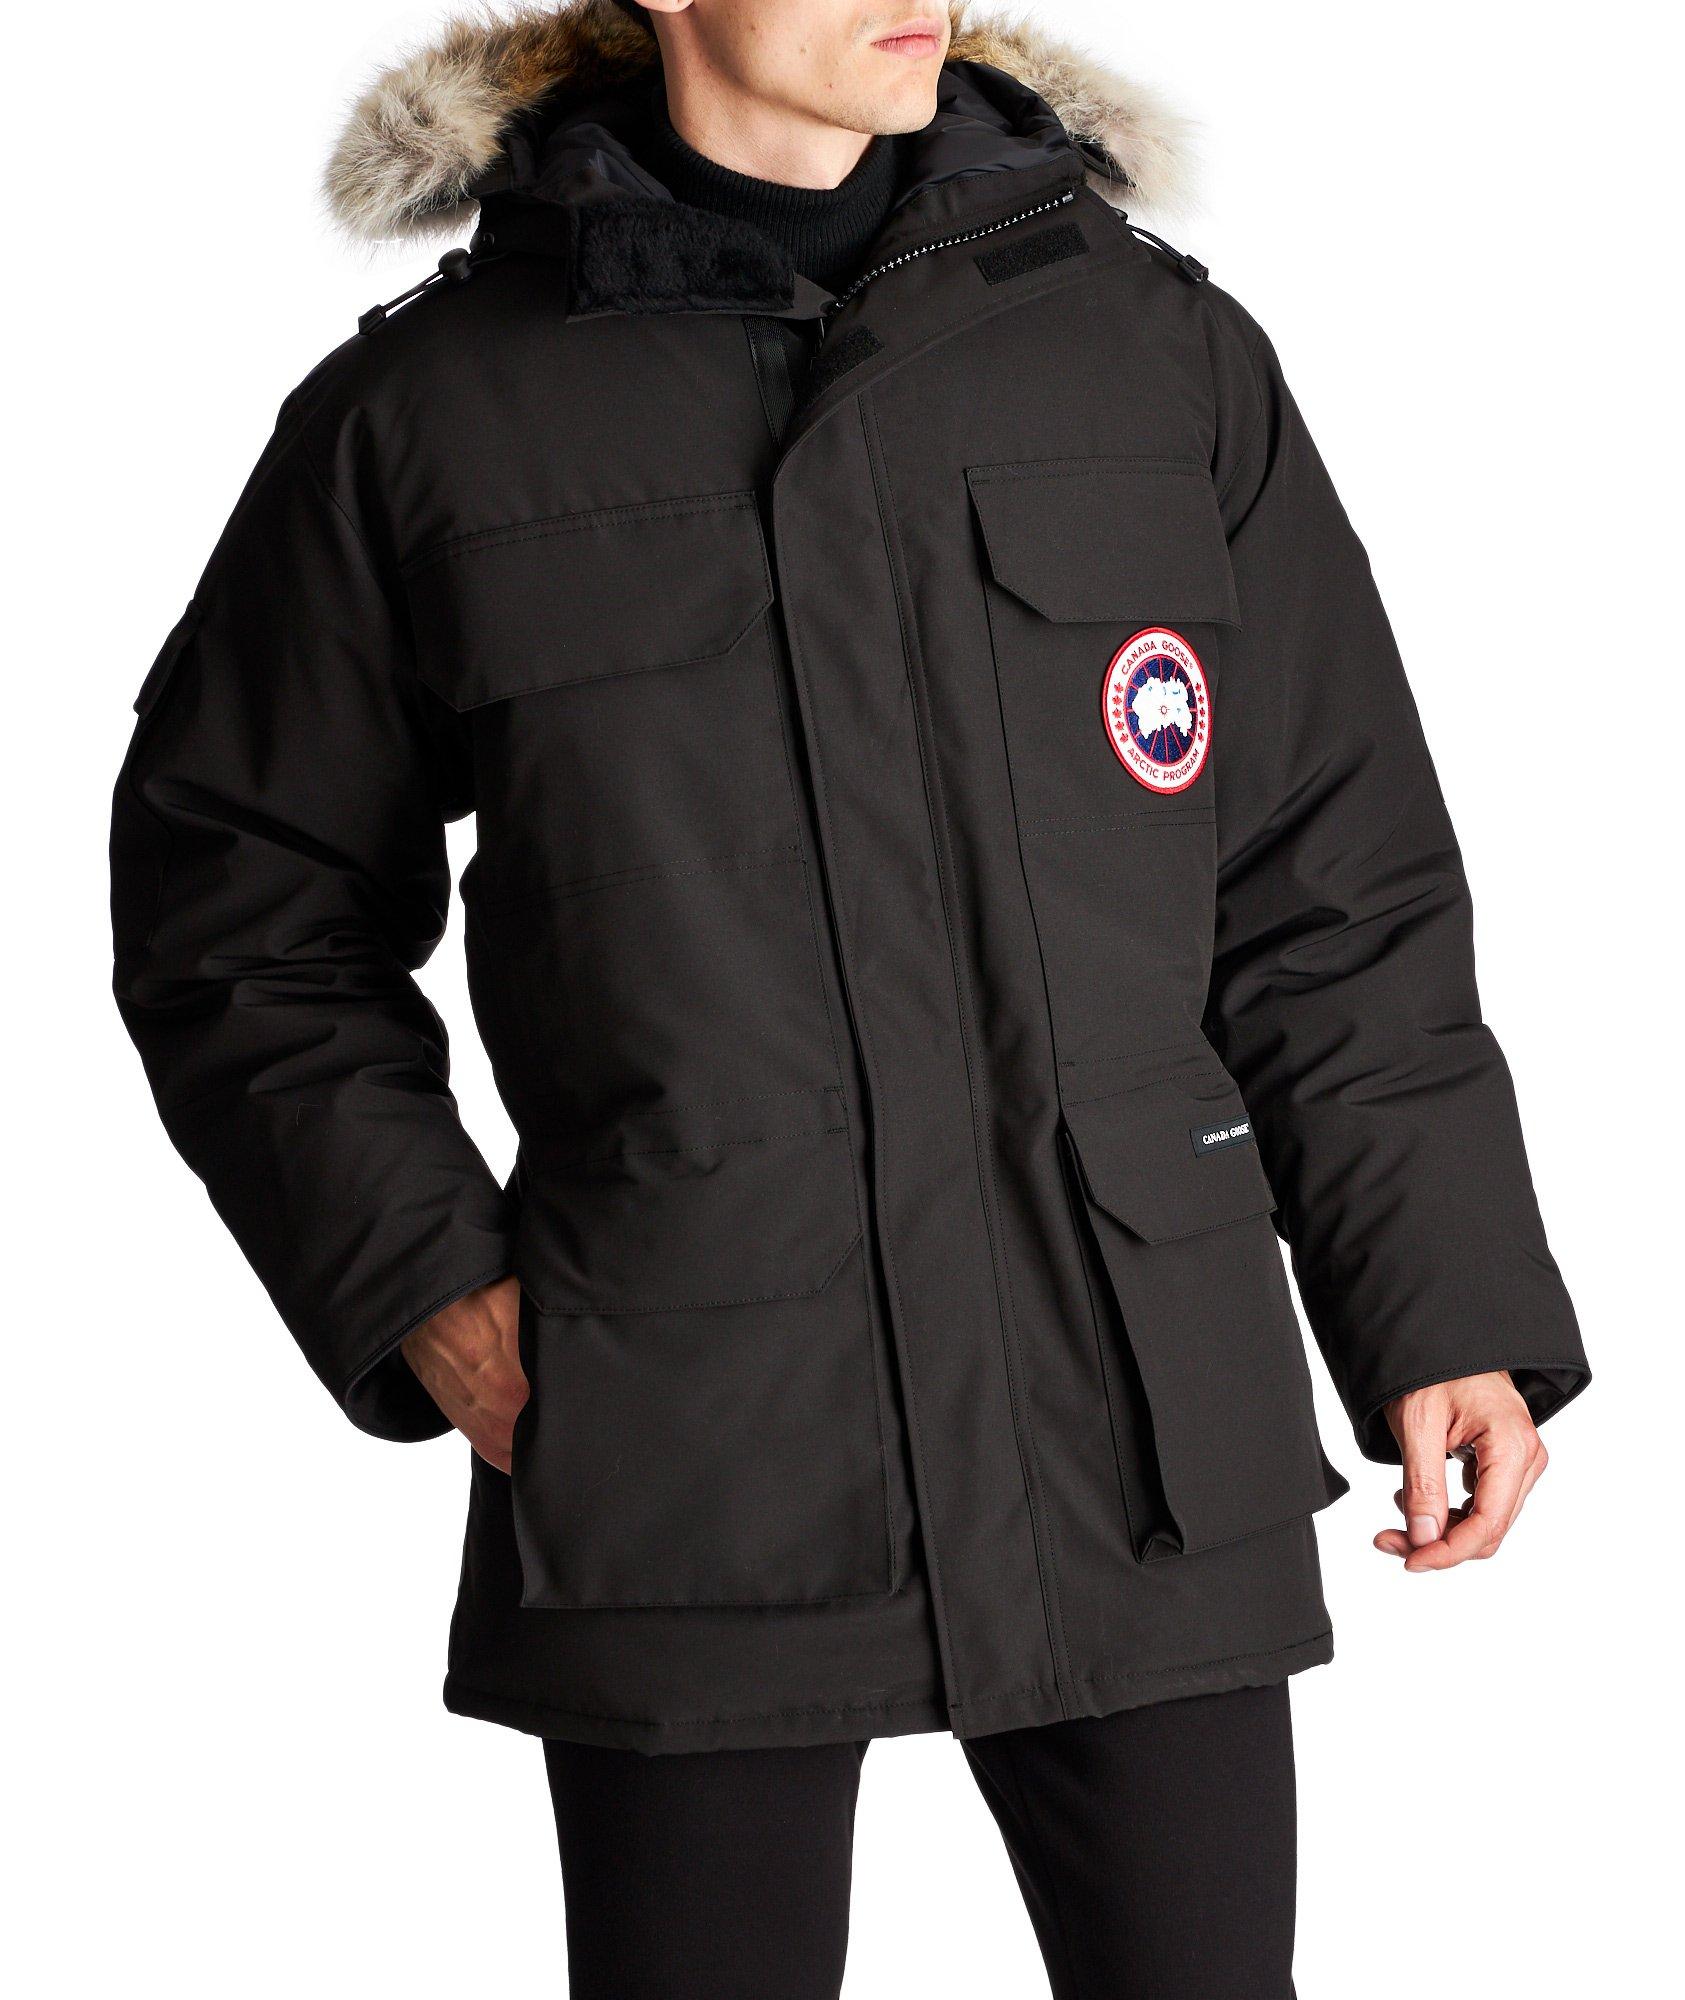 Expedition Parka image 0